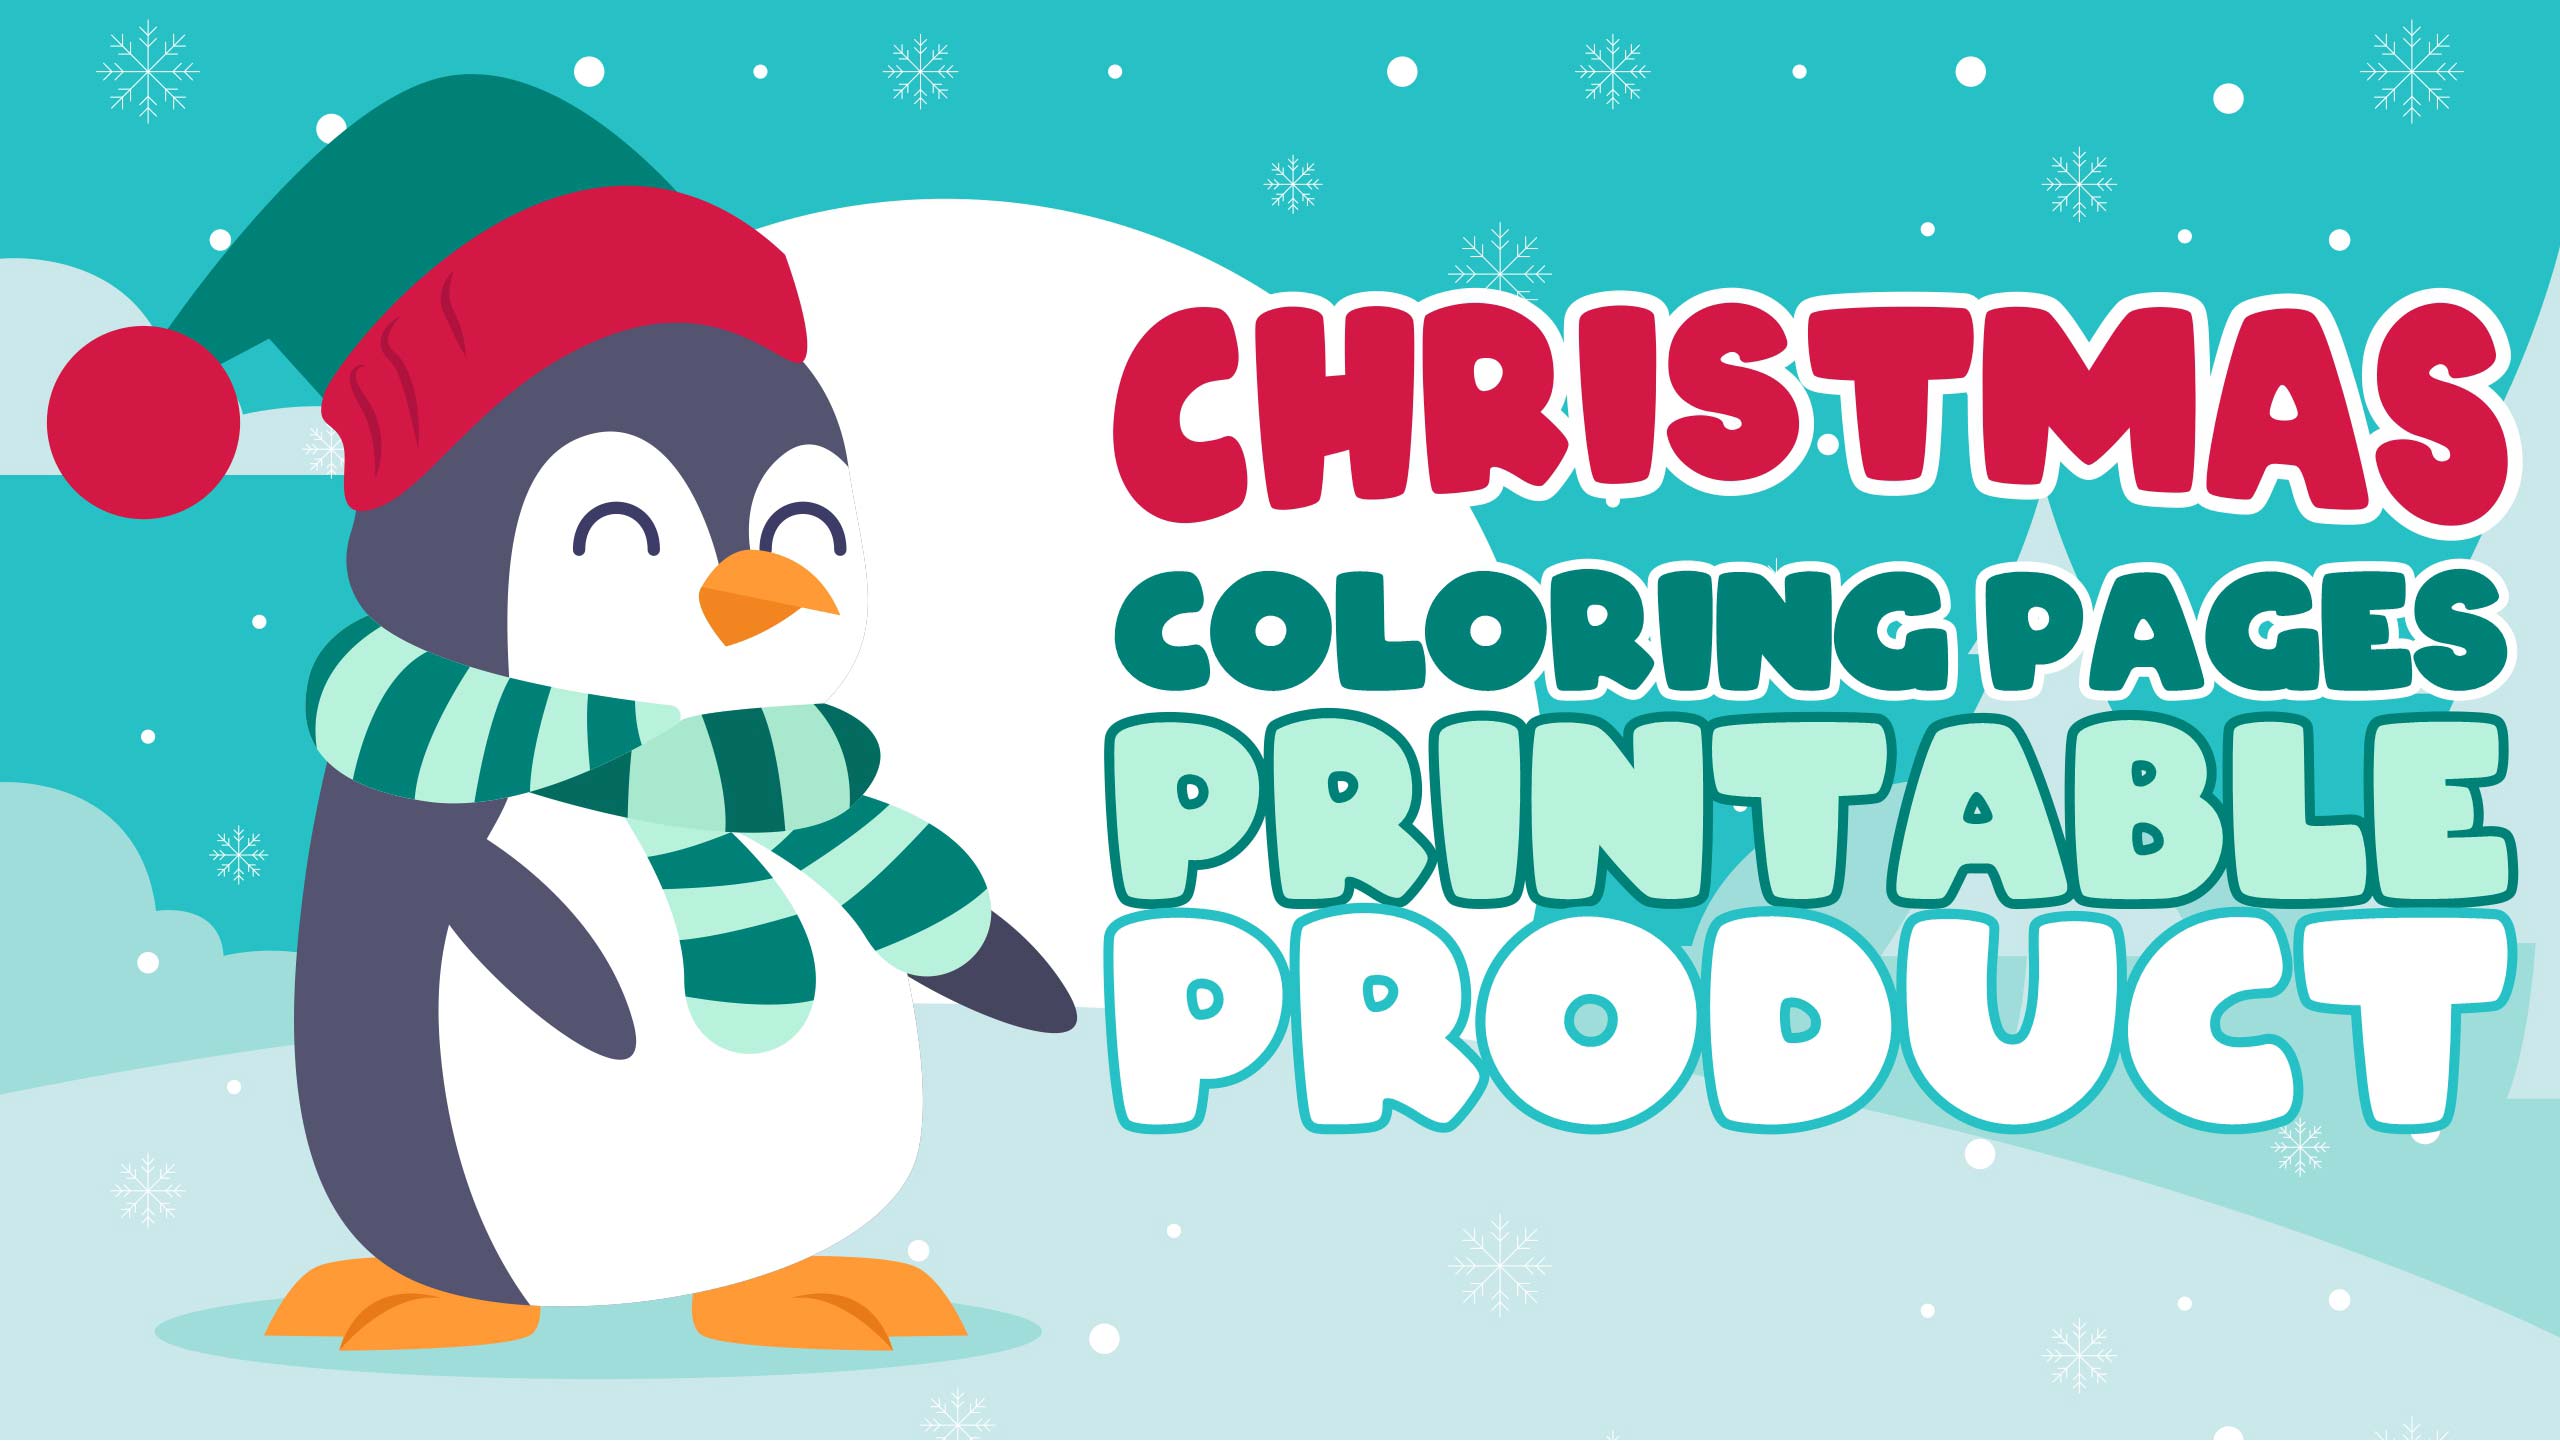 Christmas Coloring Pages Printable Product